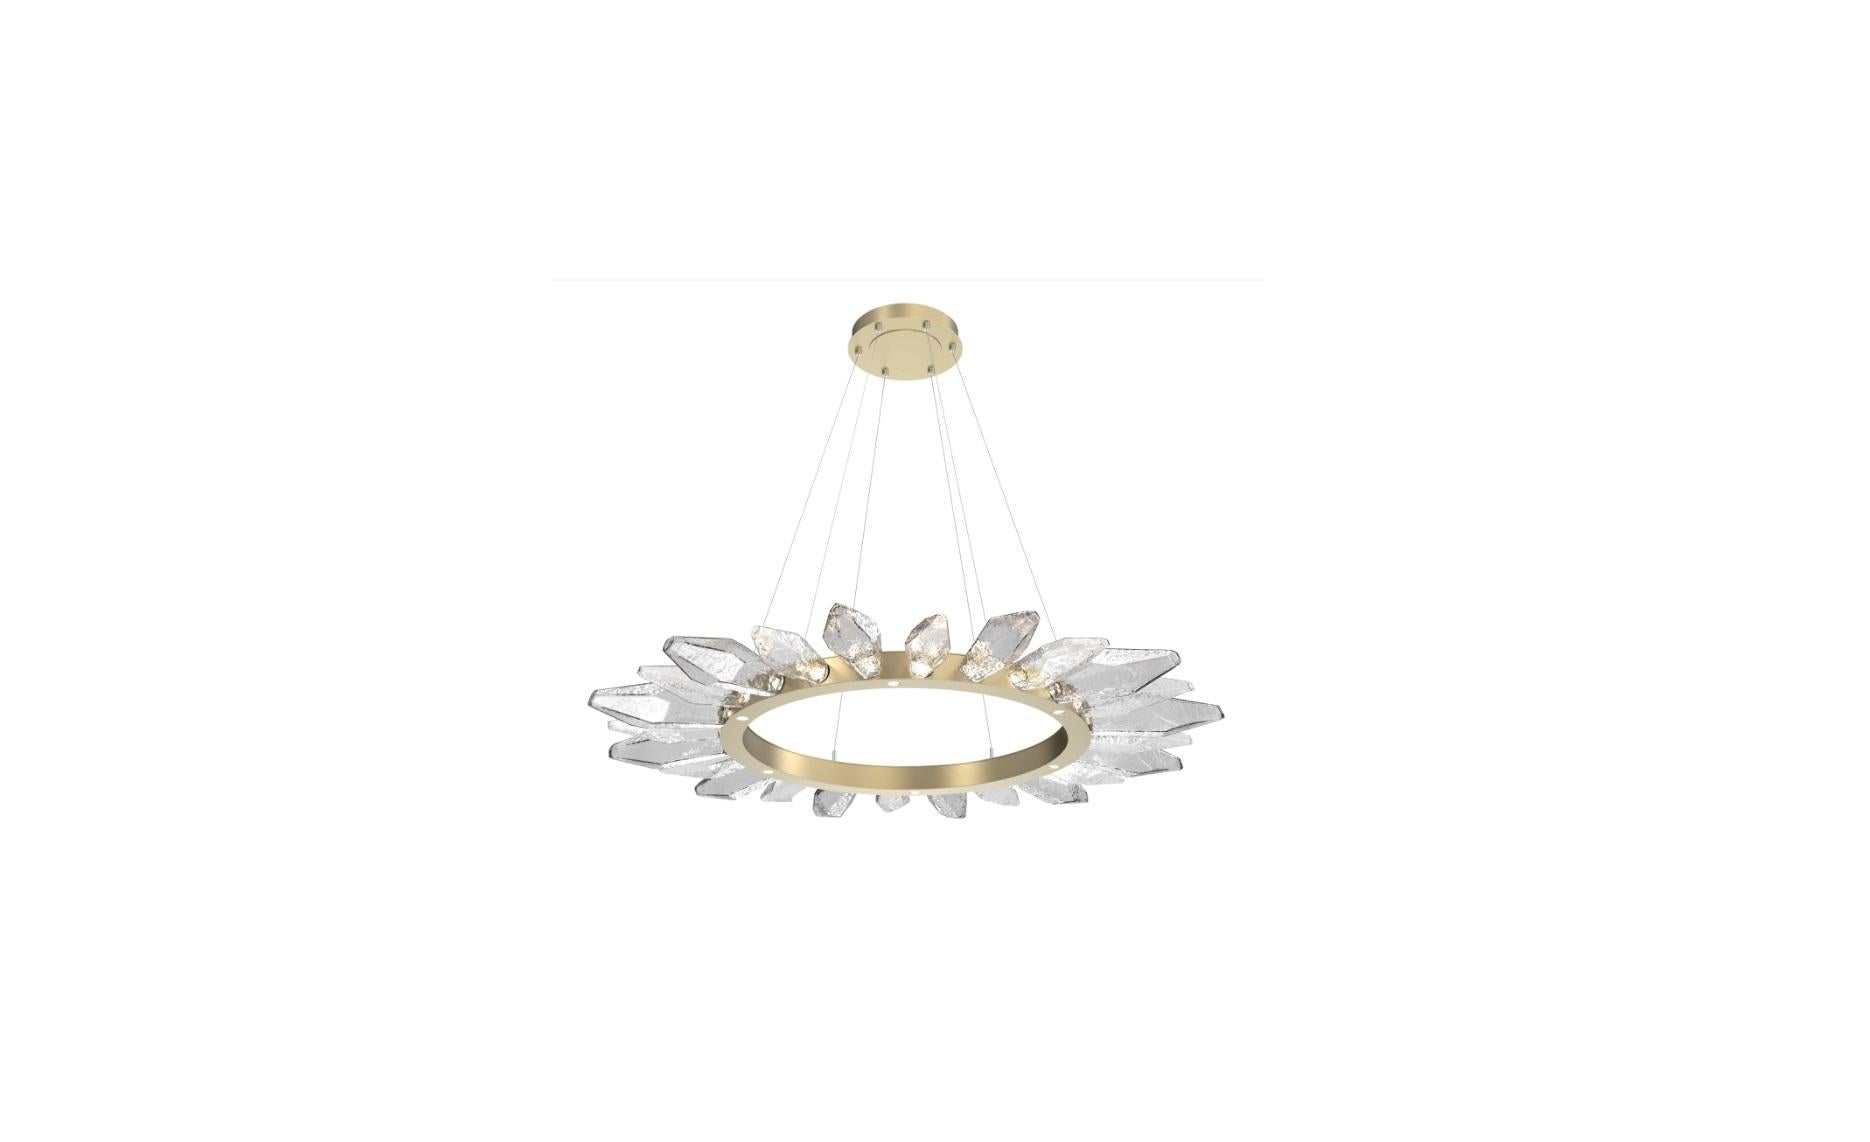 Like a bright sunflower, the Rock Crystal radial ring chandelier shines from the inside out. Juxtaposing LED-illuminated artisan blown glass shades reminiscent of quartz crystals with hand-polished steel, the Radial Ring exudes dramatic modern